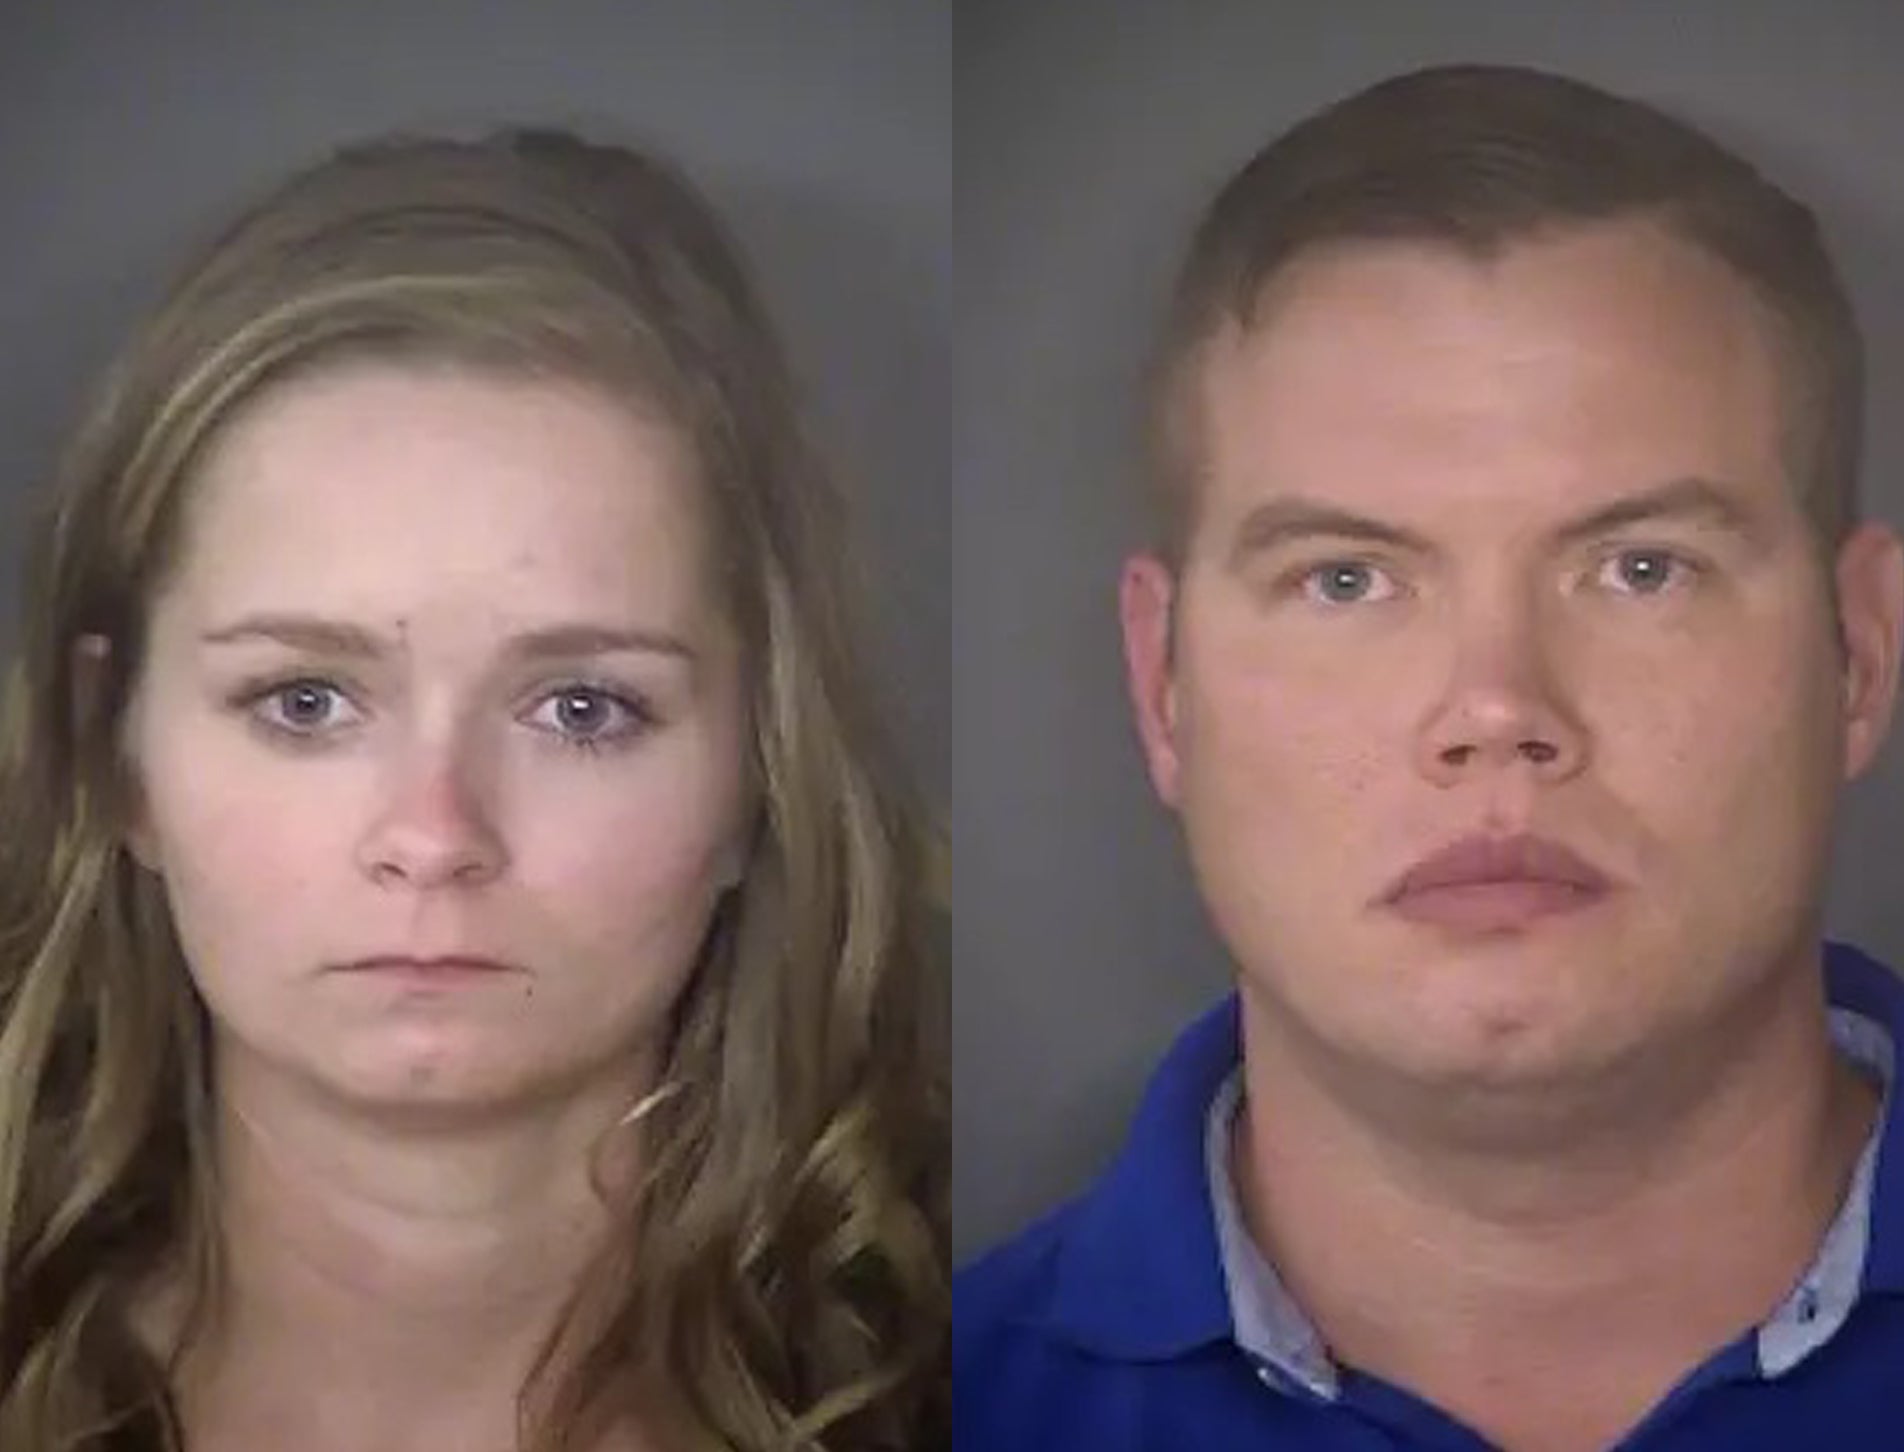 Cheyanne and James Chalkley were both arrested after bruises were found on the children by authorities